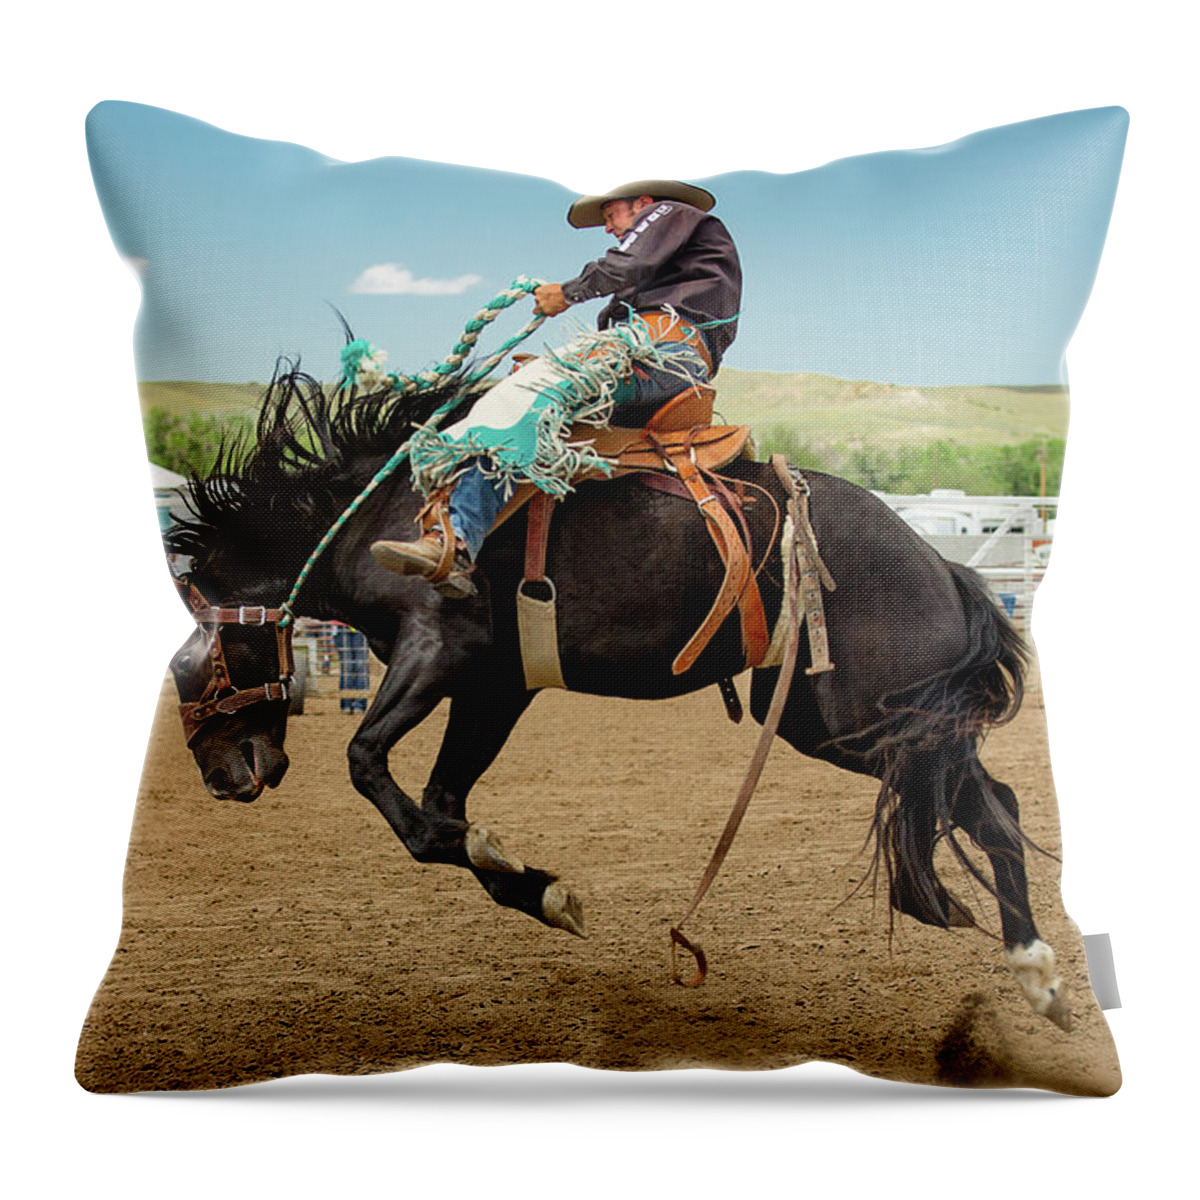 Rodeo Throw Pillow featuring the photograph High Ride by Todd Klassy